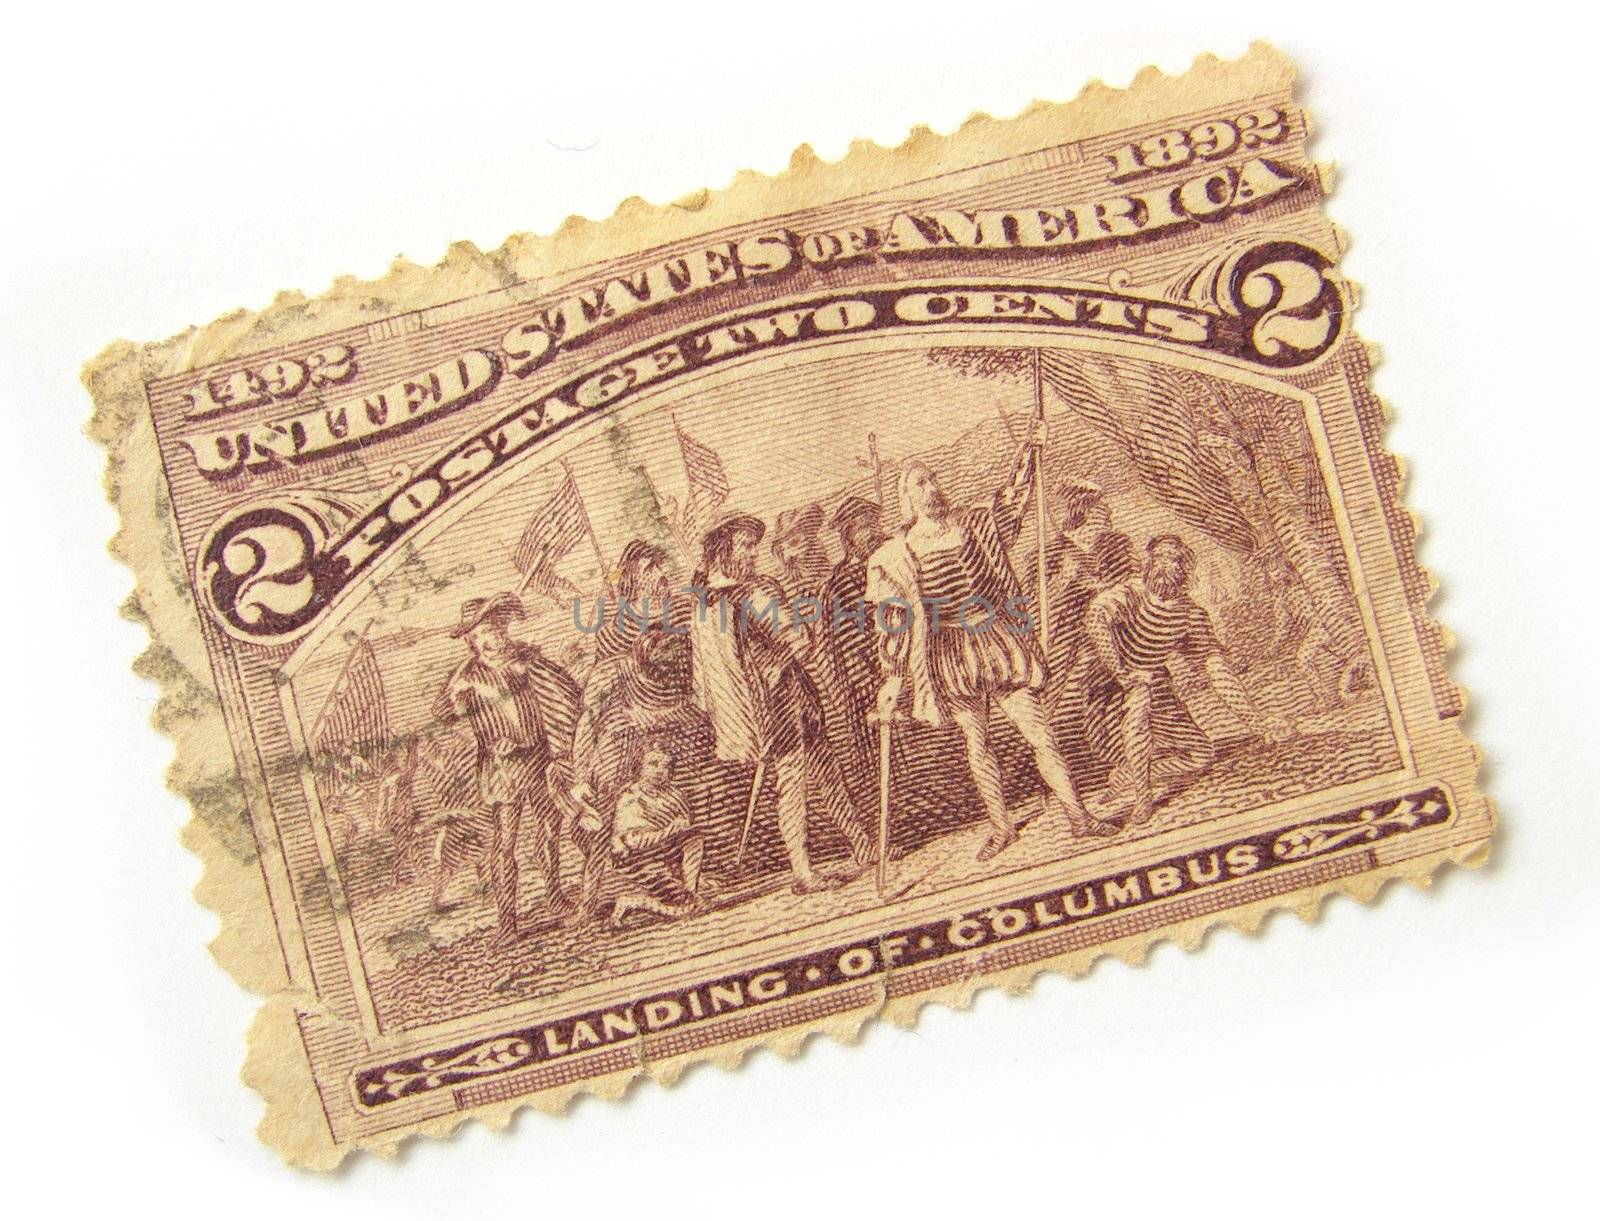 US Postage Stamp by Flaps